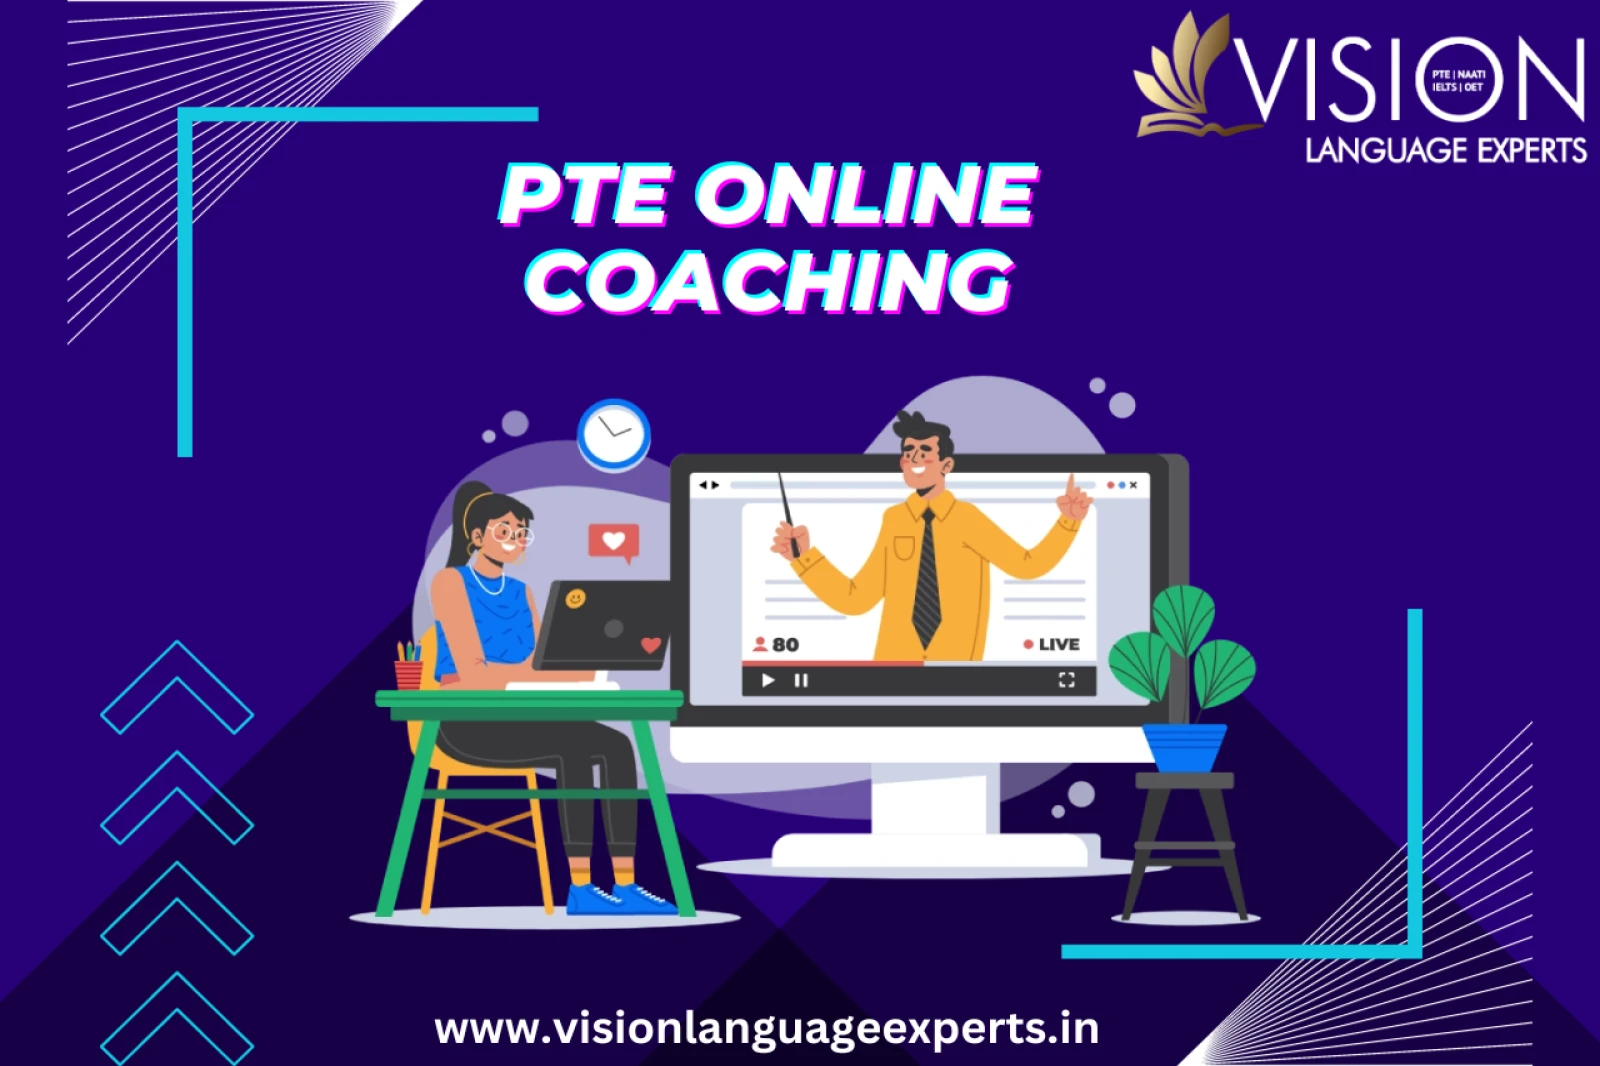 Elevate Your English Skills with PTE Online Coaching at Vision Language Experts